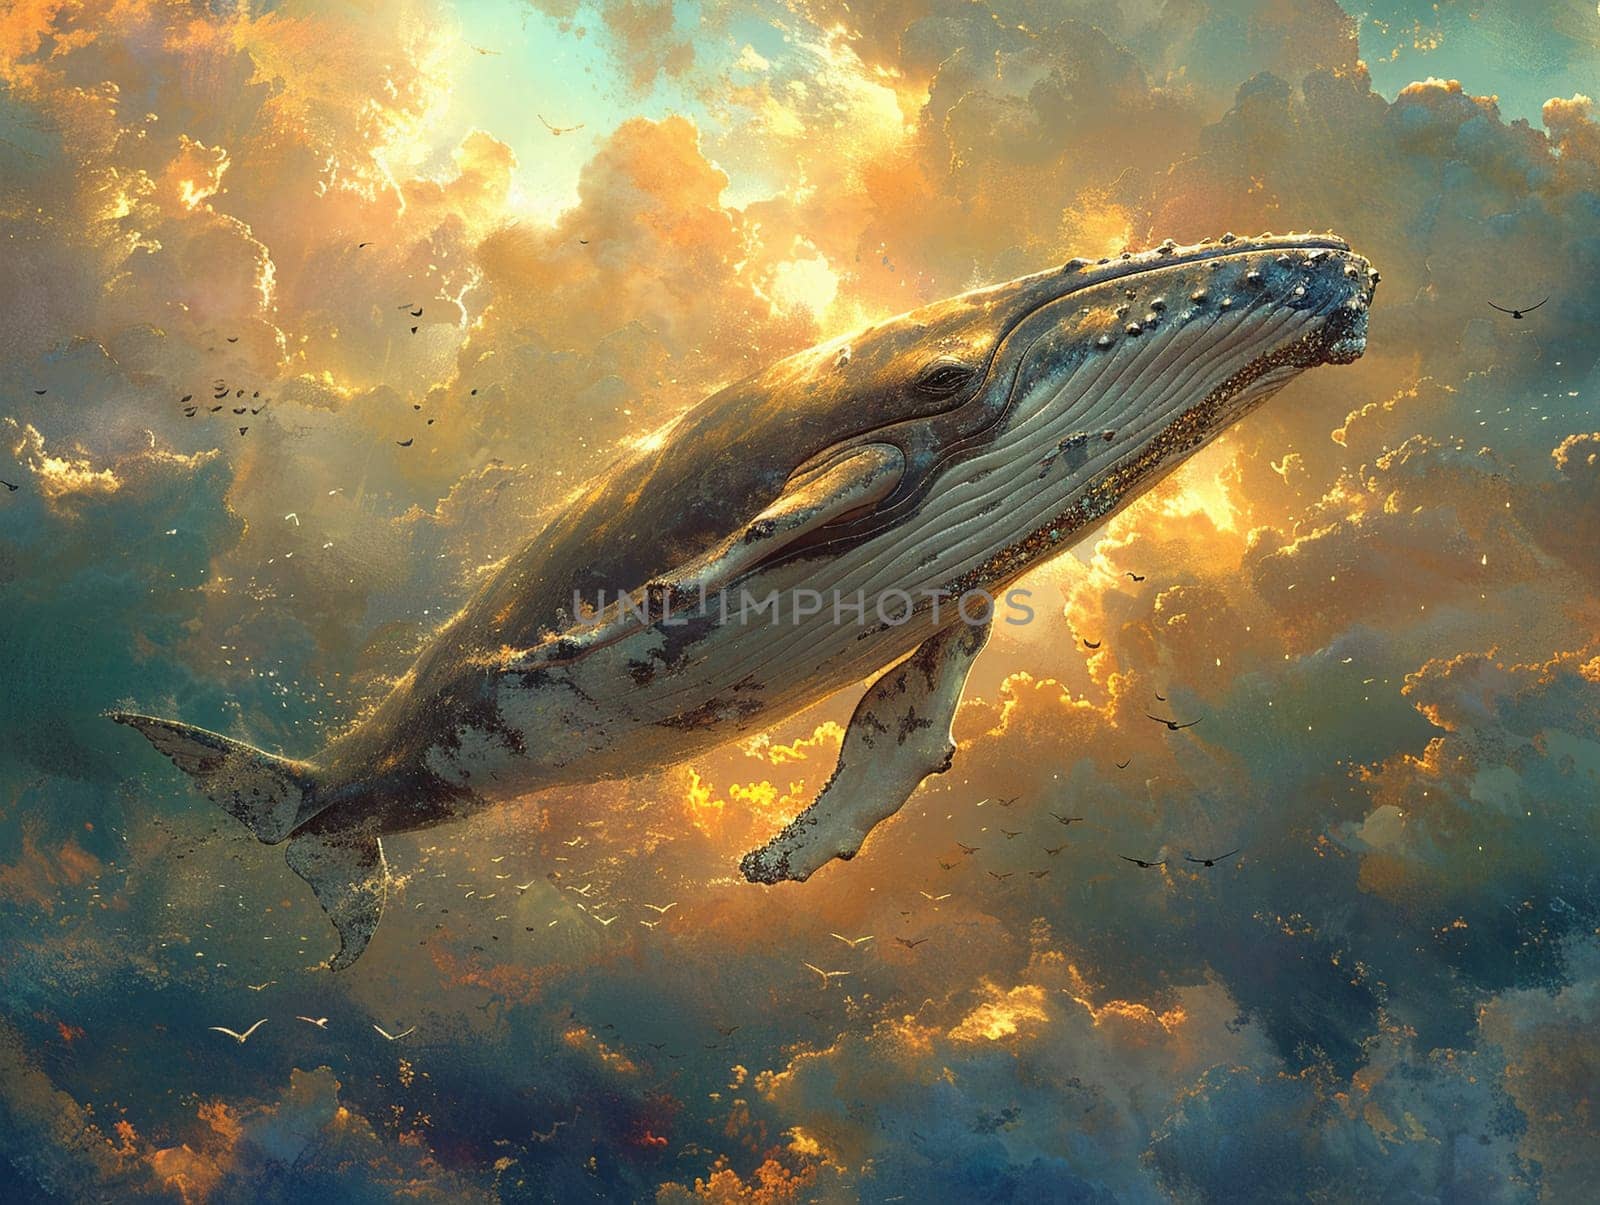 Whale soaring through a cloud-filled sky, reimagining nature in a fantastical illustration.